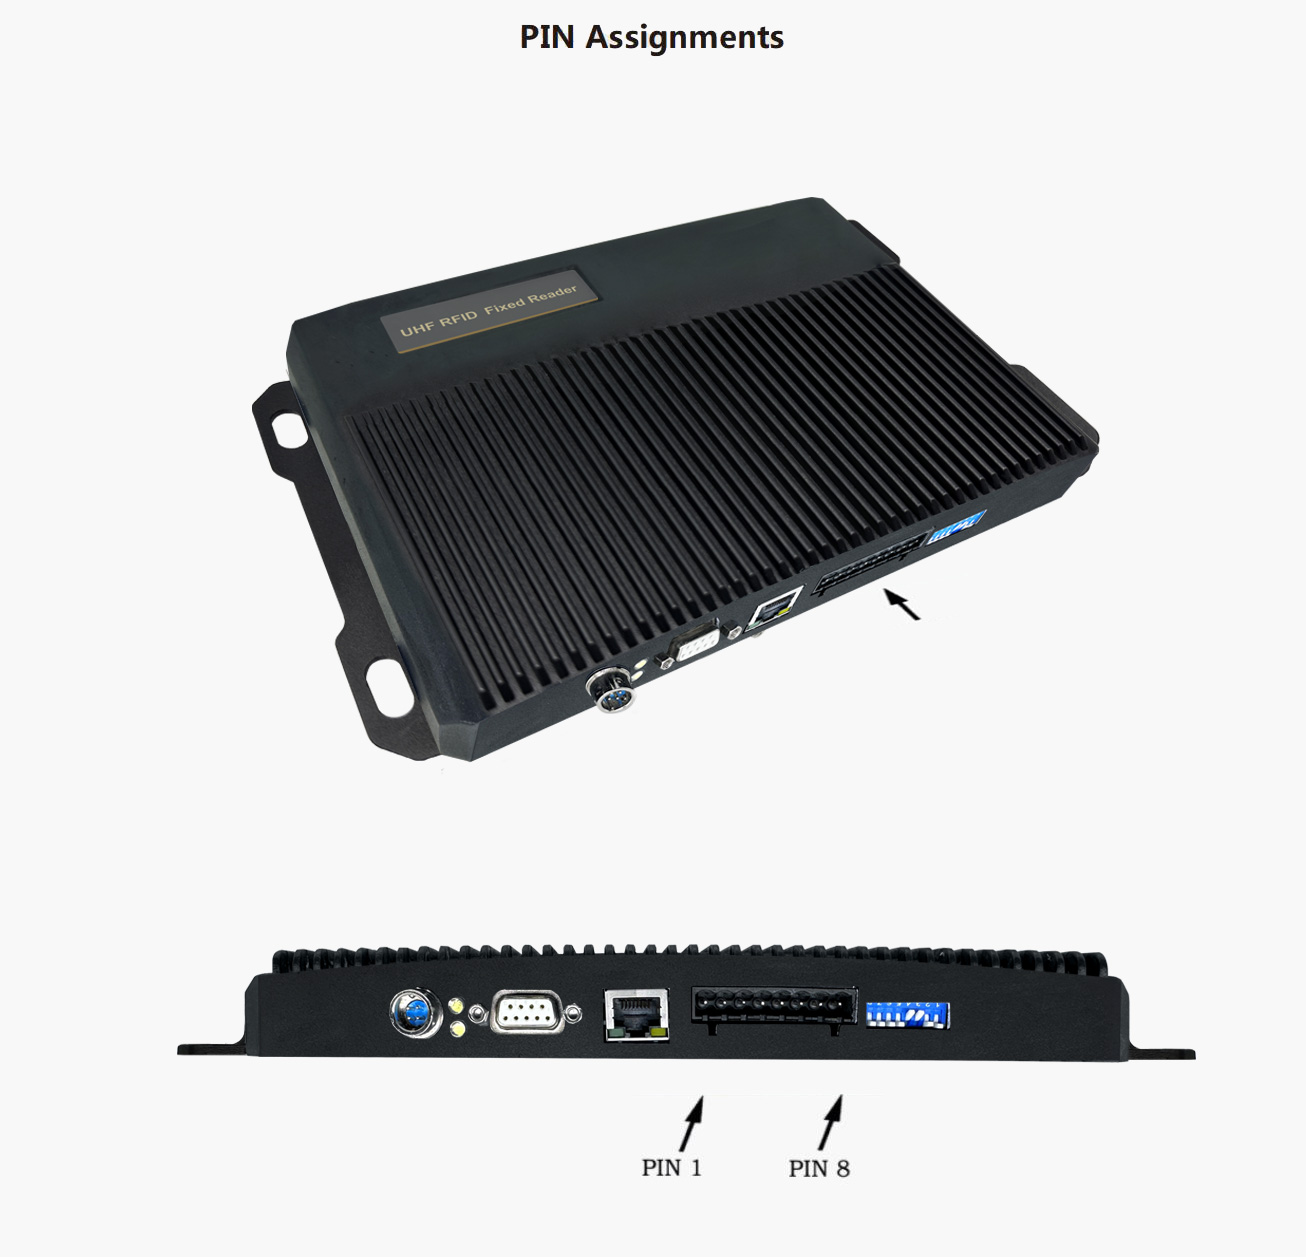 ixed RFID UHF 4 ports reader with Impinj Indy R2000 chip